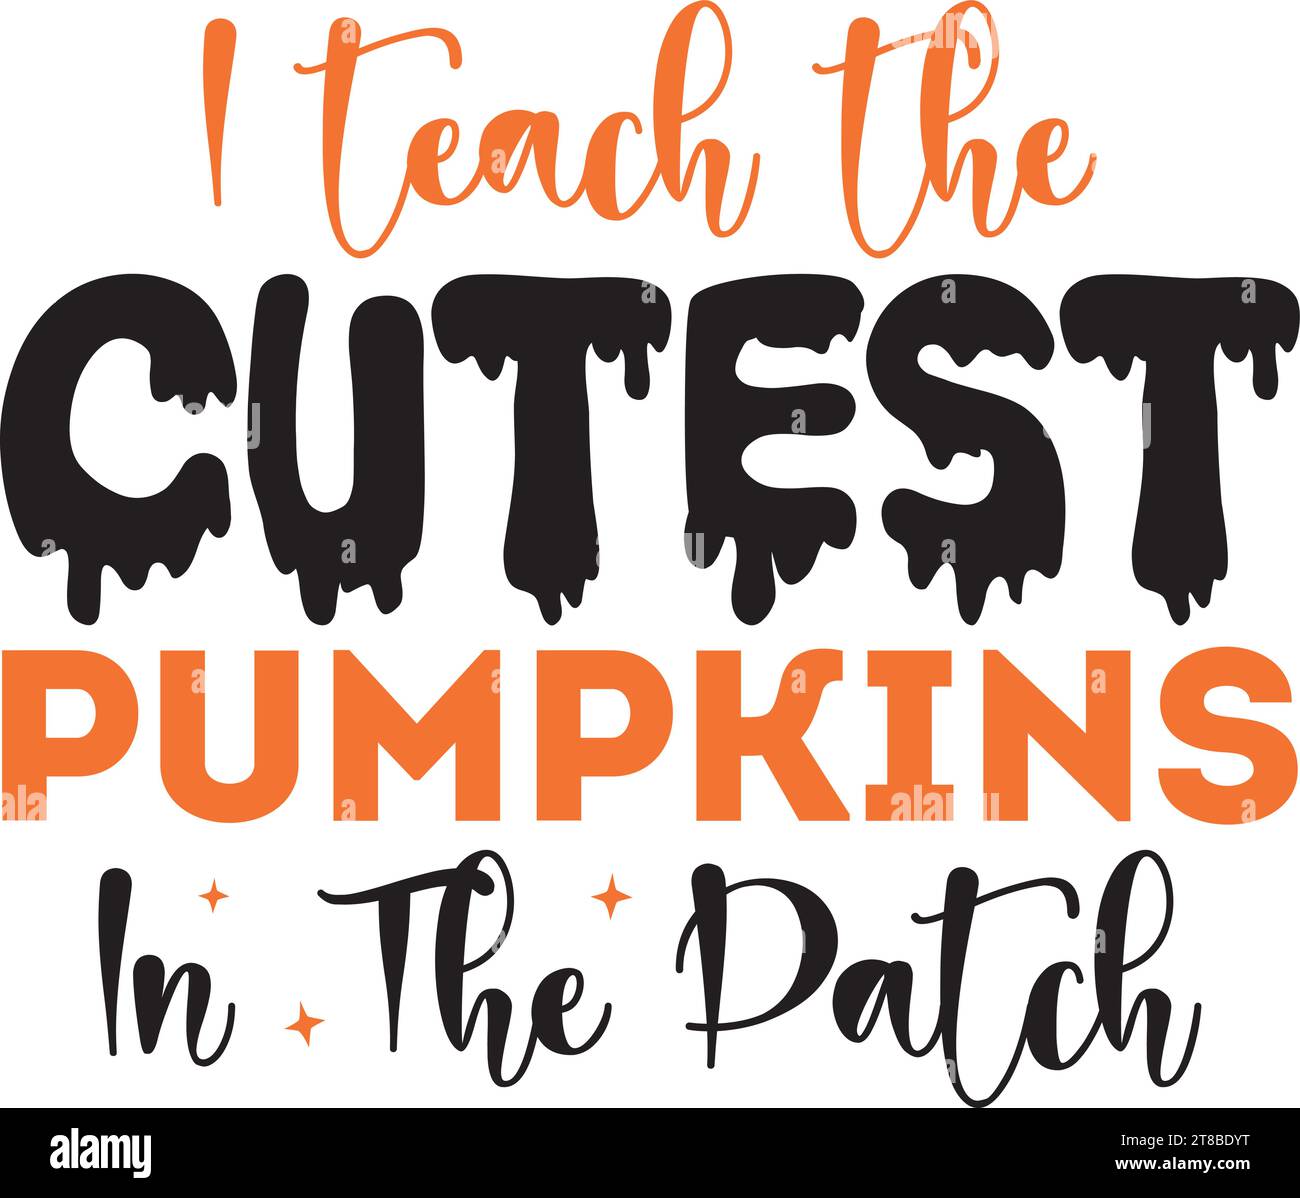 I Teach the Cutest Pumpkins in the Patch Stock Vector